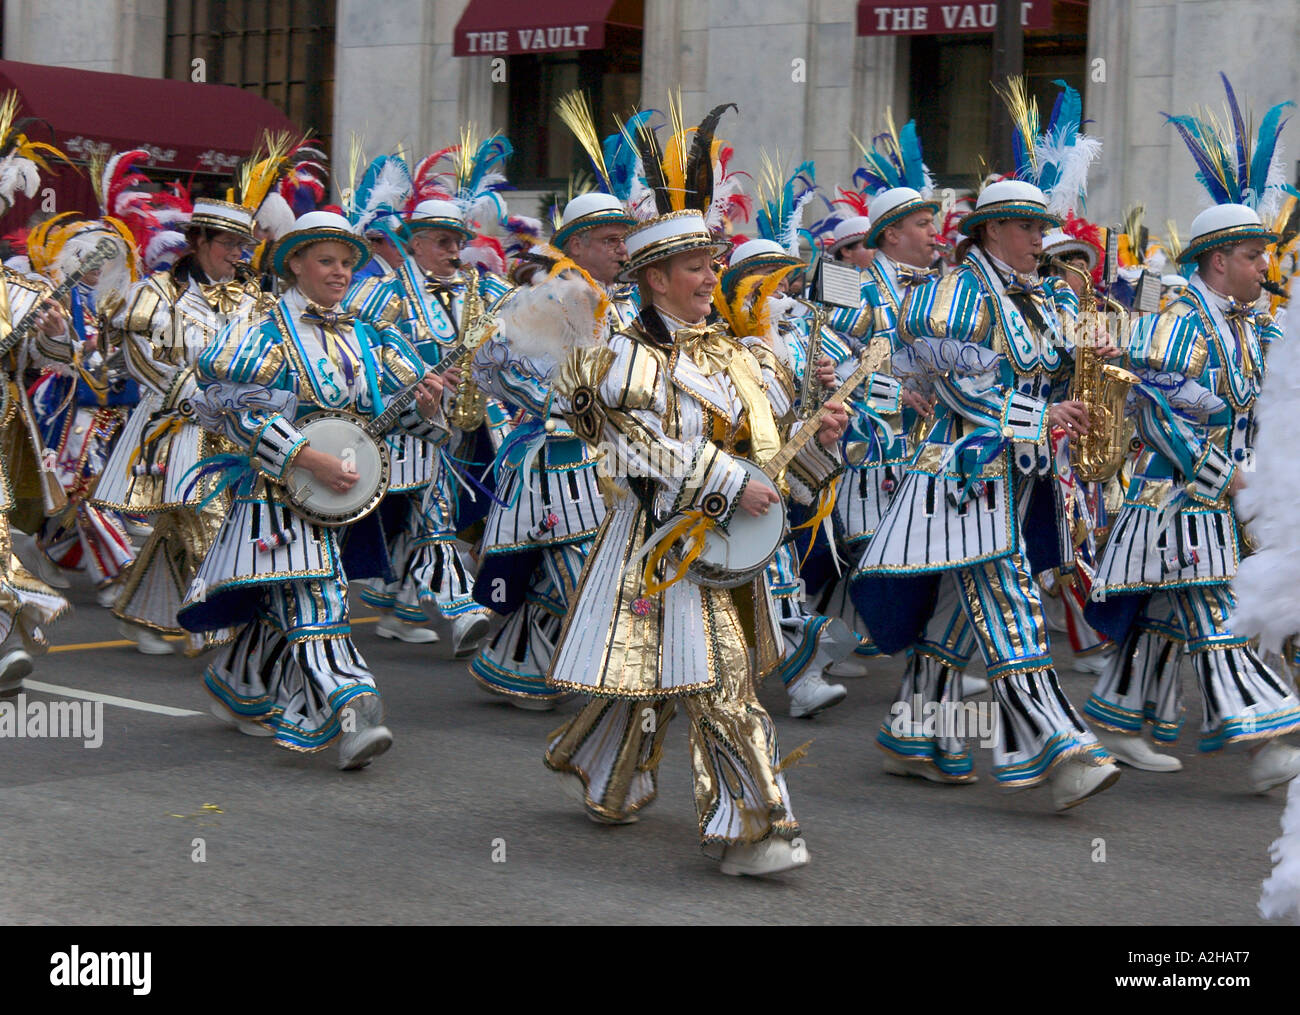 String band marching and playing, Mummers Parade, Philadelphia